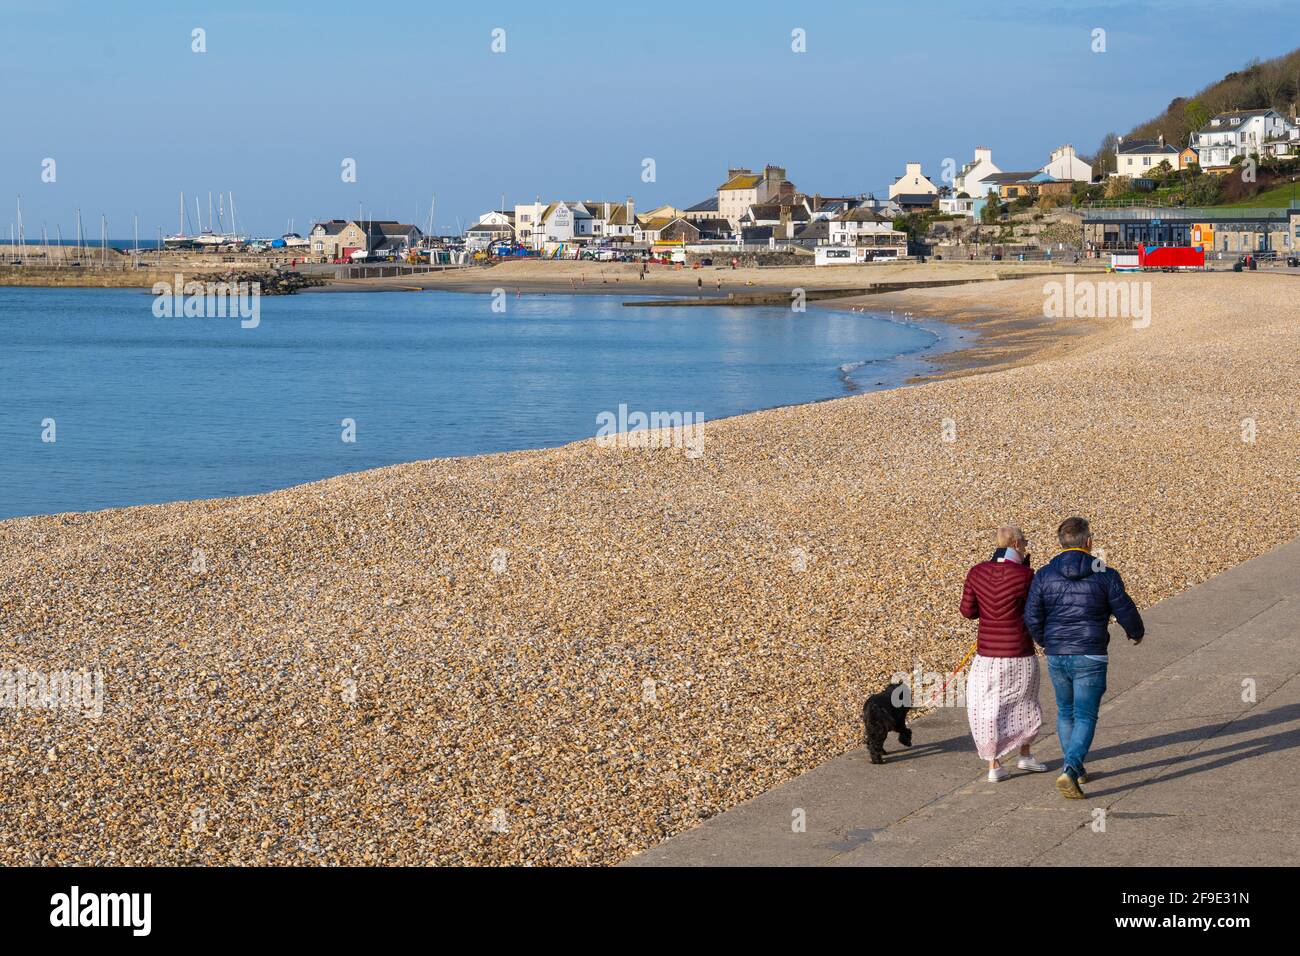 Lyme Regis, Dorset, UK. 18th Apr, 2021. UK Weather. A lovely warm and sunny start to the day at the seaside resort of Lyme Regis. Locals enjoy the quiet on Sunday morning before the beach gets busy. Credit: Celia McMahon/Alamy Live News Stock Photo